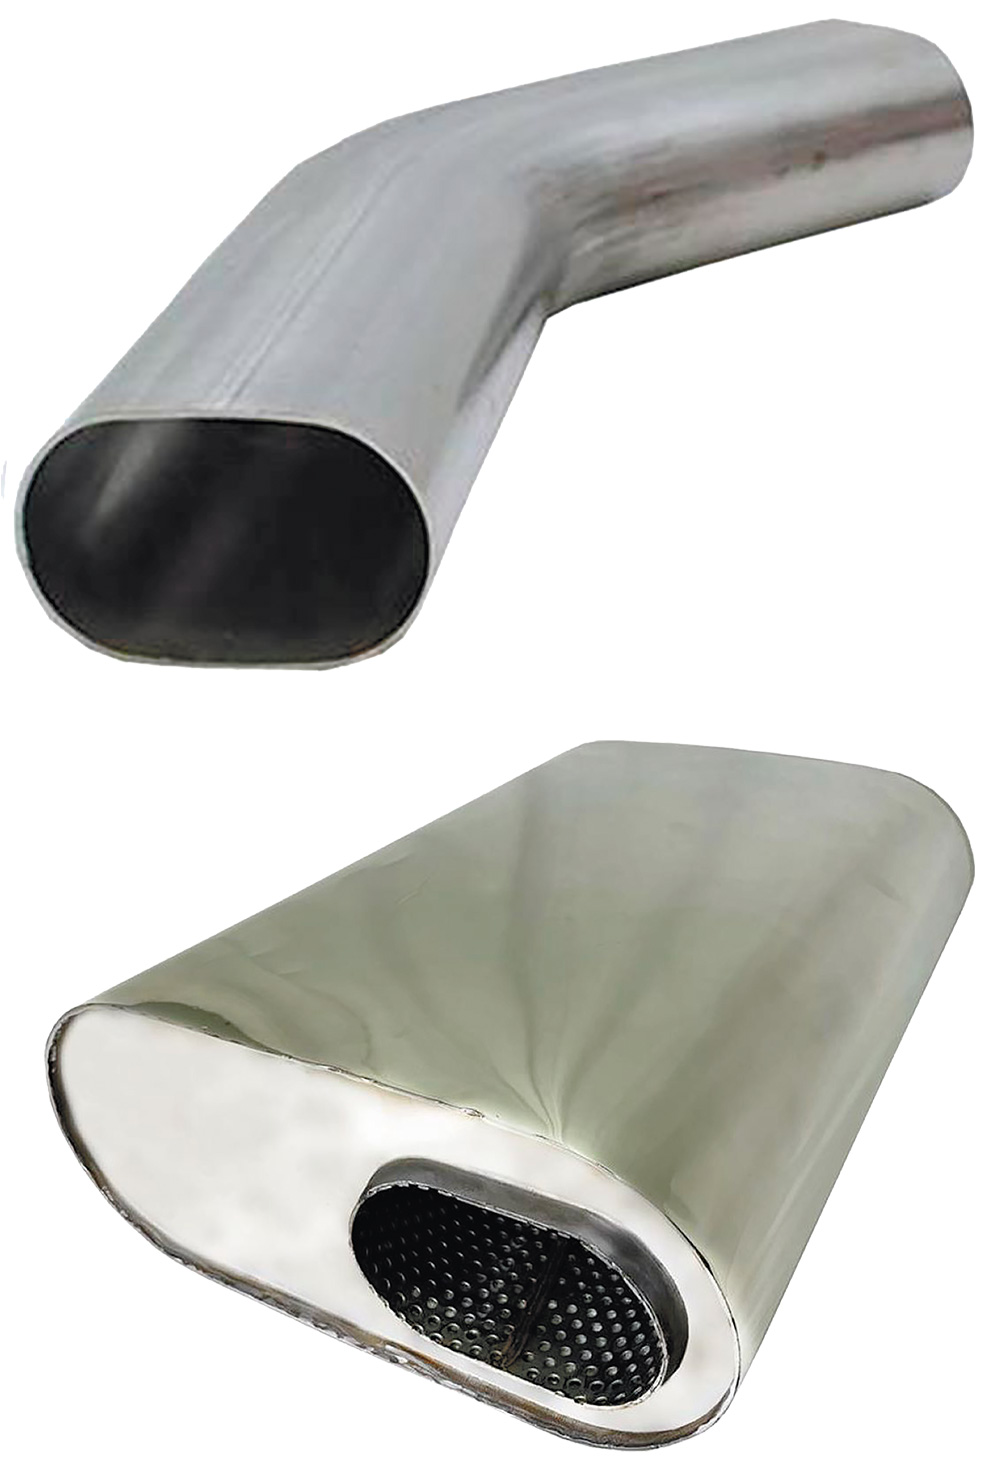 An exhaust system